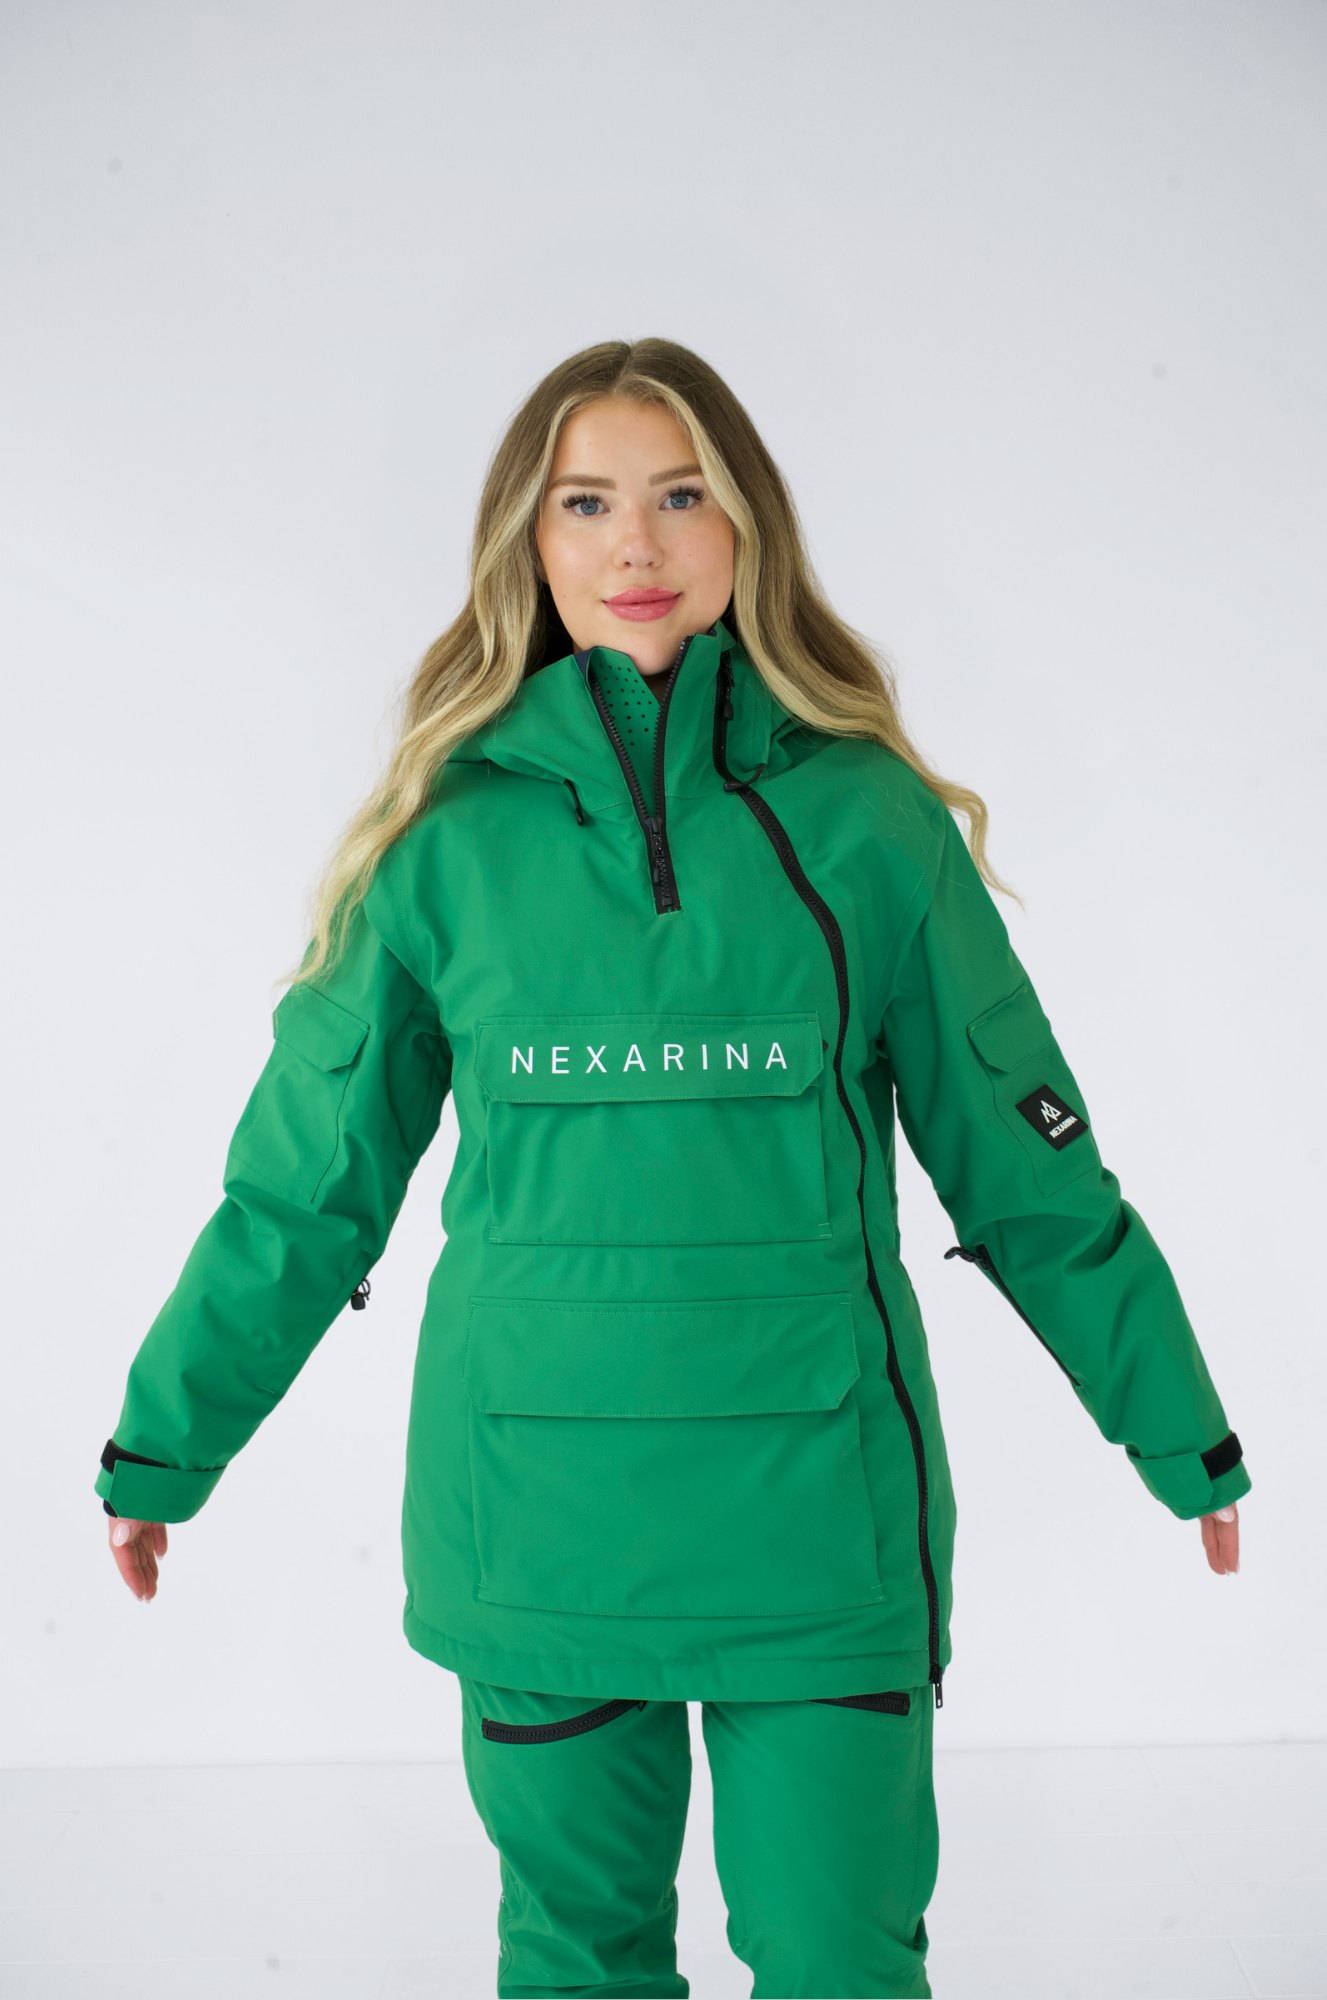 Woman wearing a green Nexarina Indy snow jacket, front view with arms outstretched.